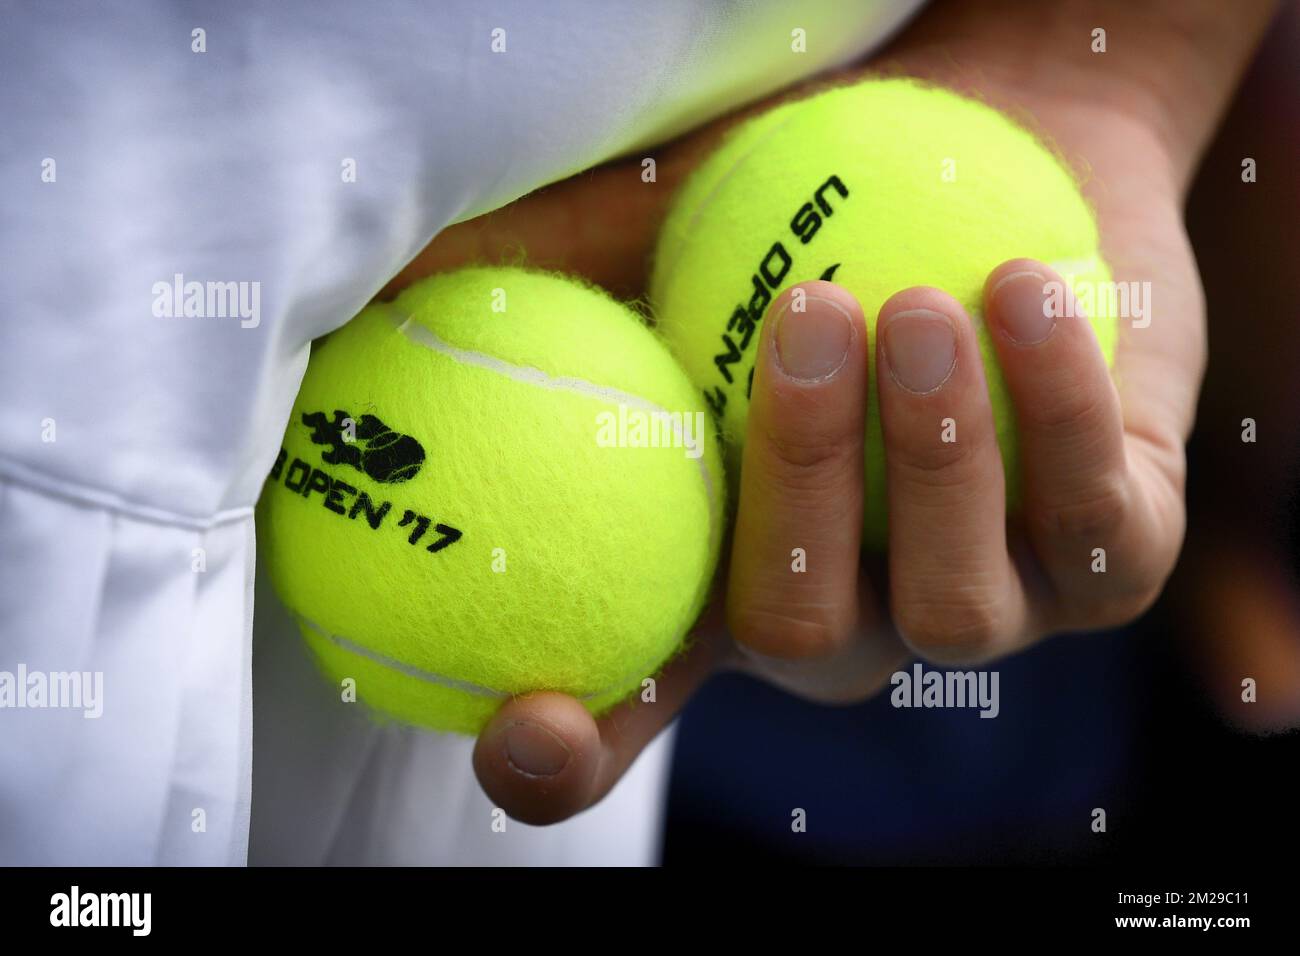 Illustration picture shows the hand of a ball girl holding the official US  Open Wilson match balls before the start of a tennis match between Belgian  David Goffin and French Gael Monfils,